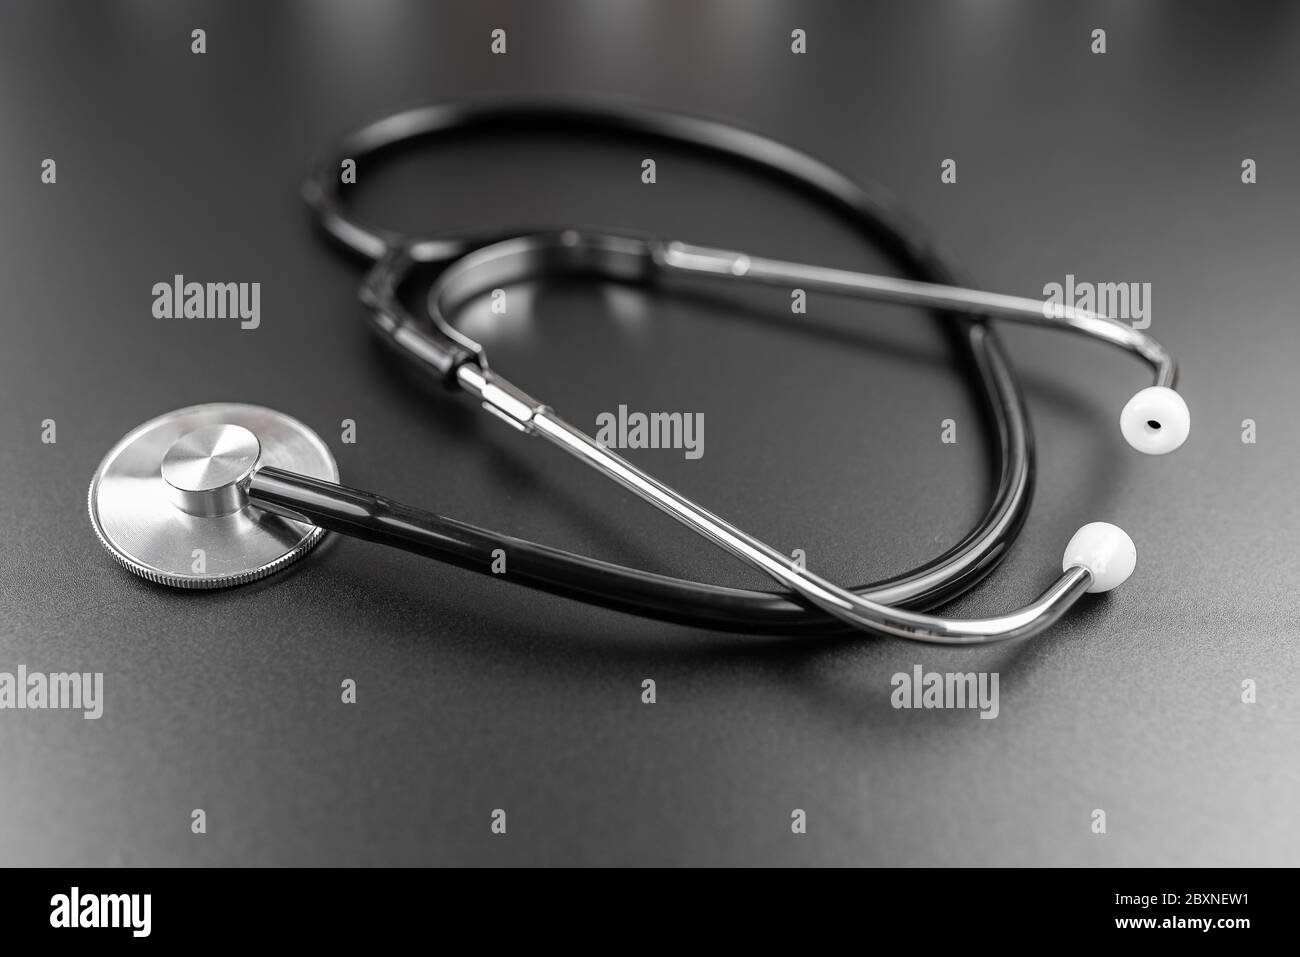 close-up of stethoscope on dark table background, medical examination and diagnosis concept Stock Photo